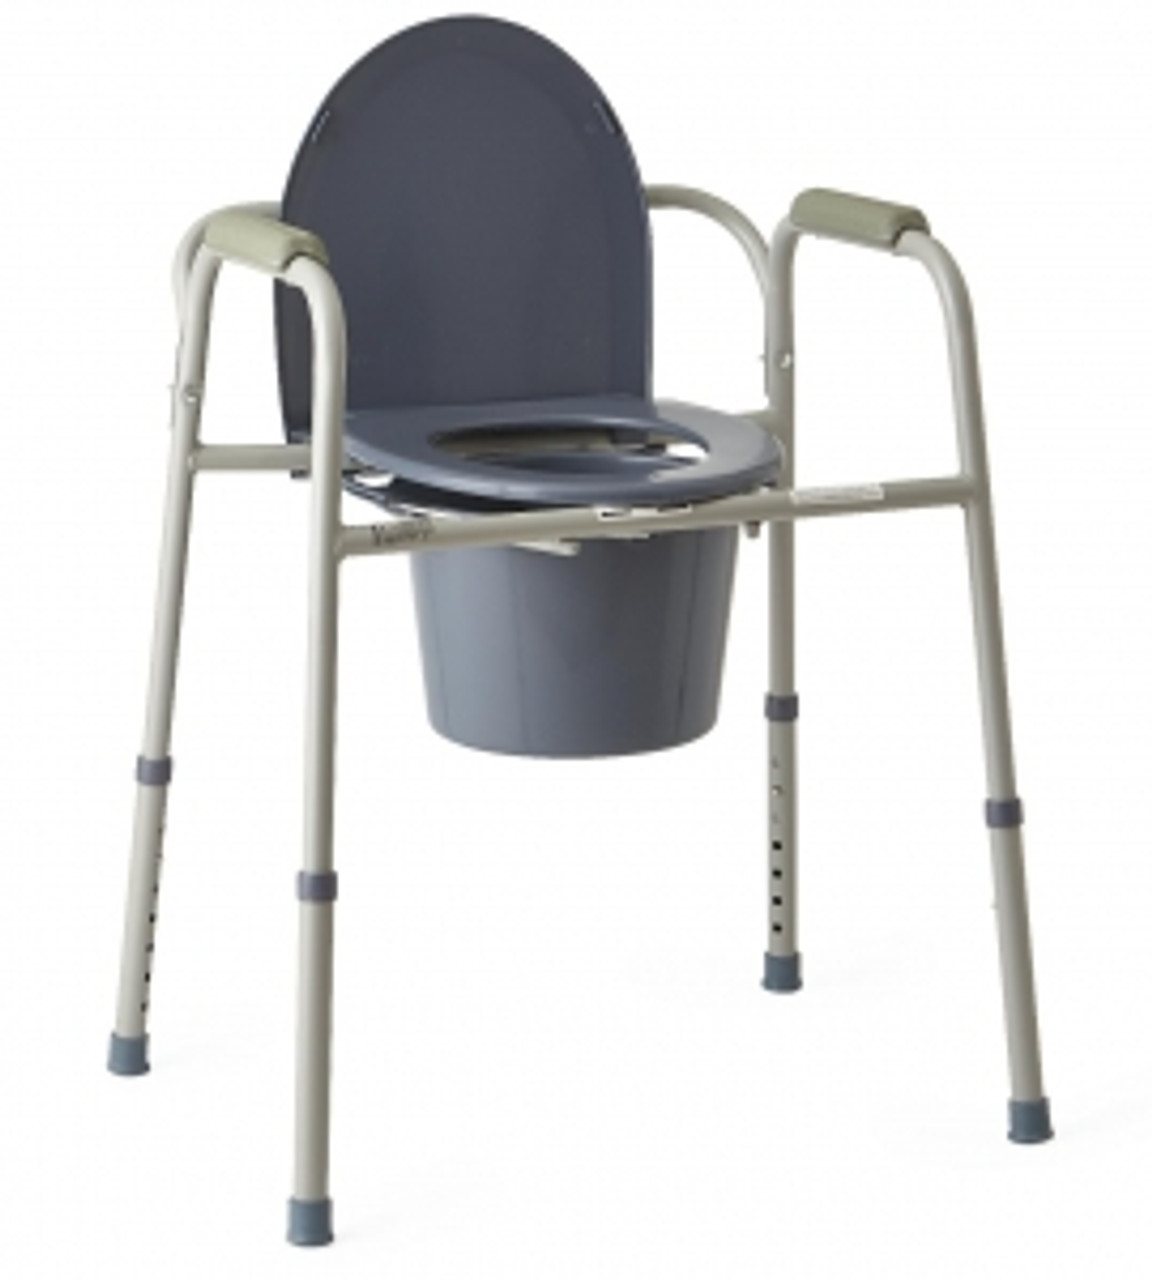 Comes with seat, lid and bucket, and splash guard
350 lb. weight capacity, 14.5" seat depth, 19" width between arms, 21" overall width
Does not come in retail packaging